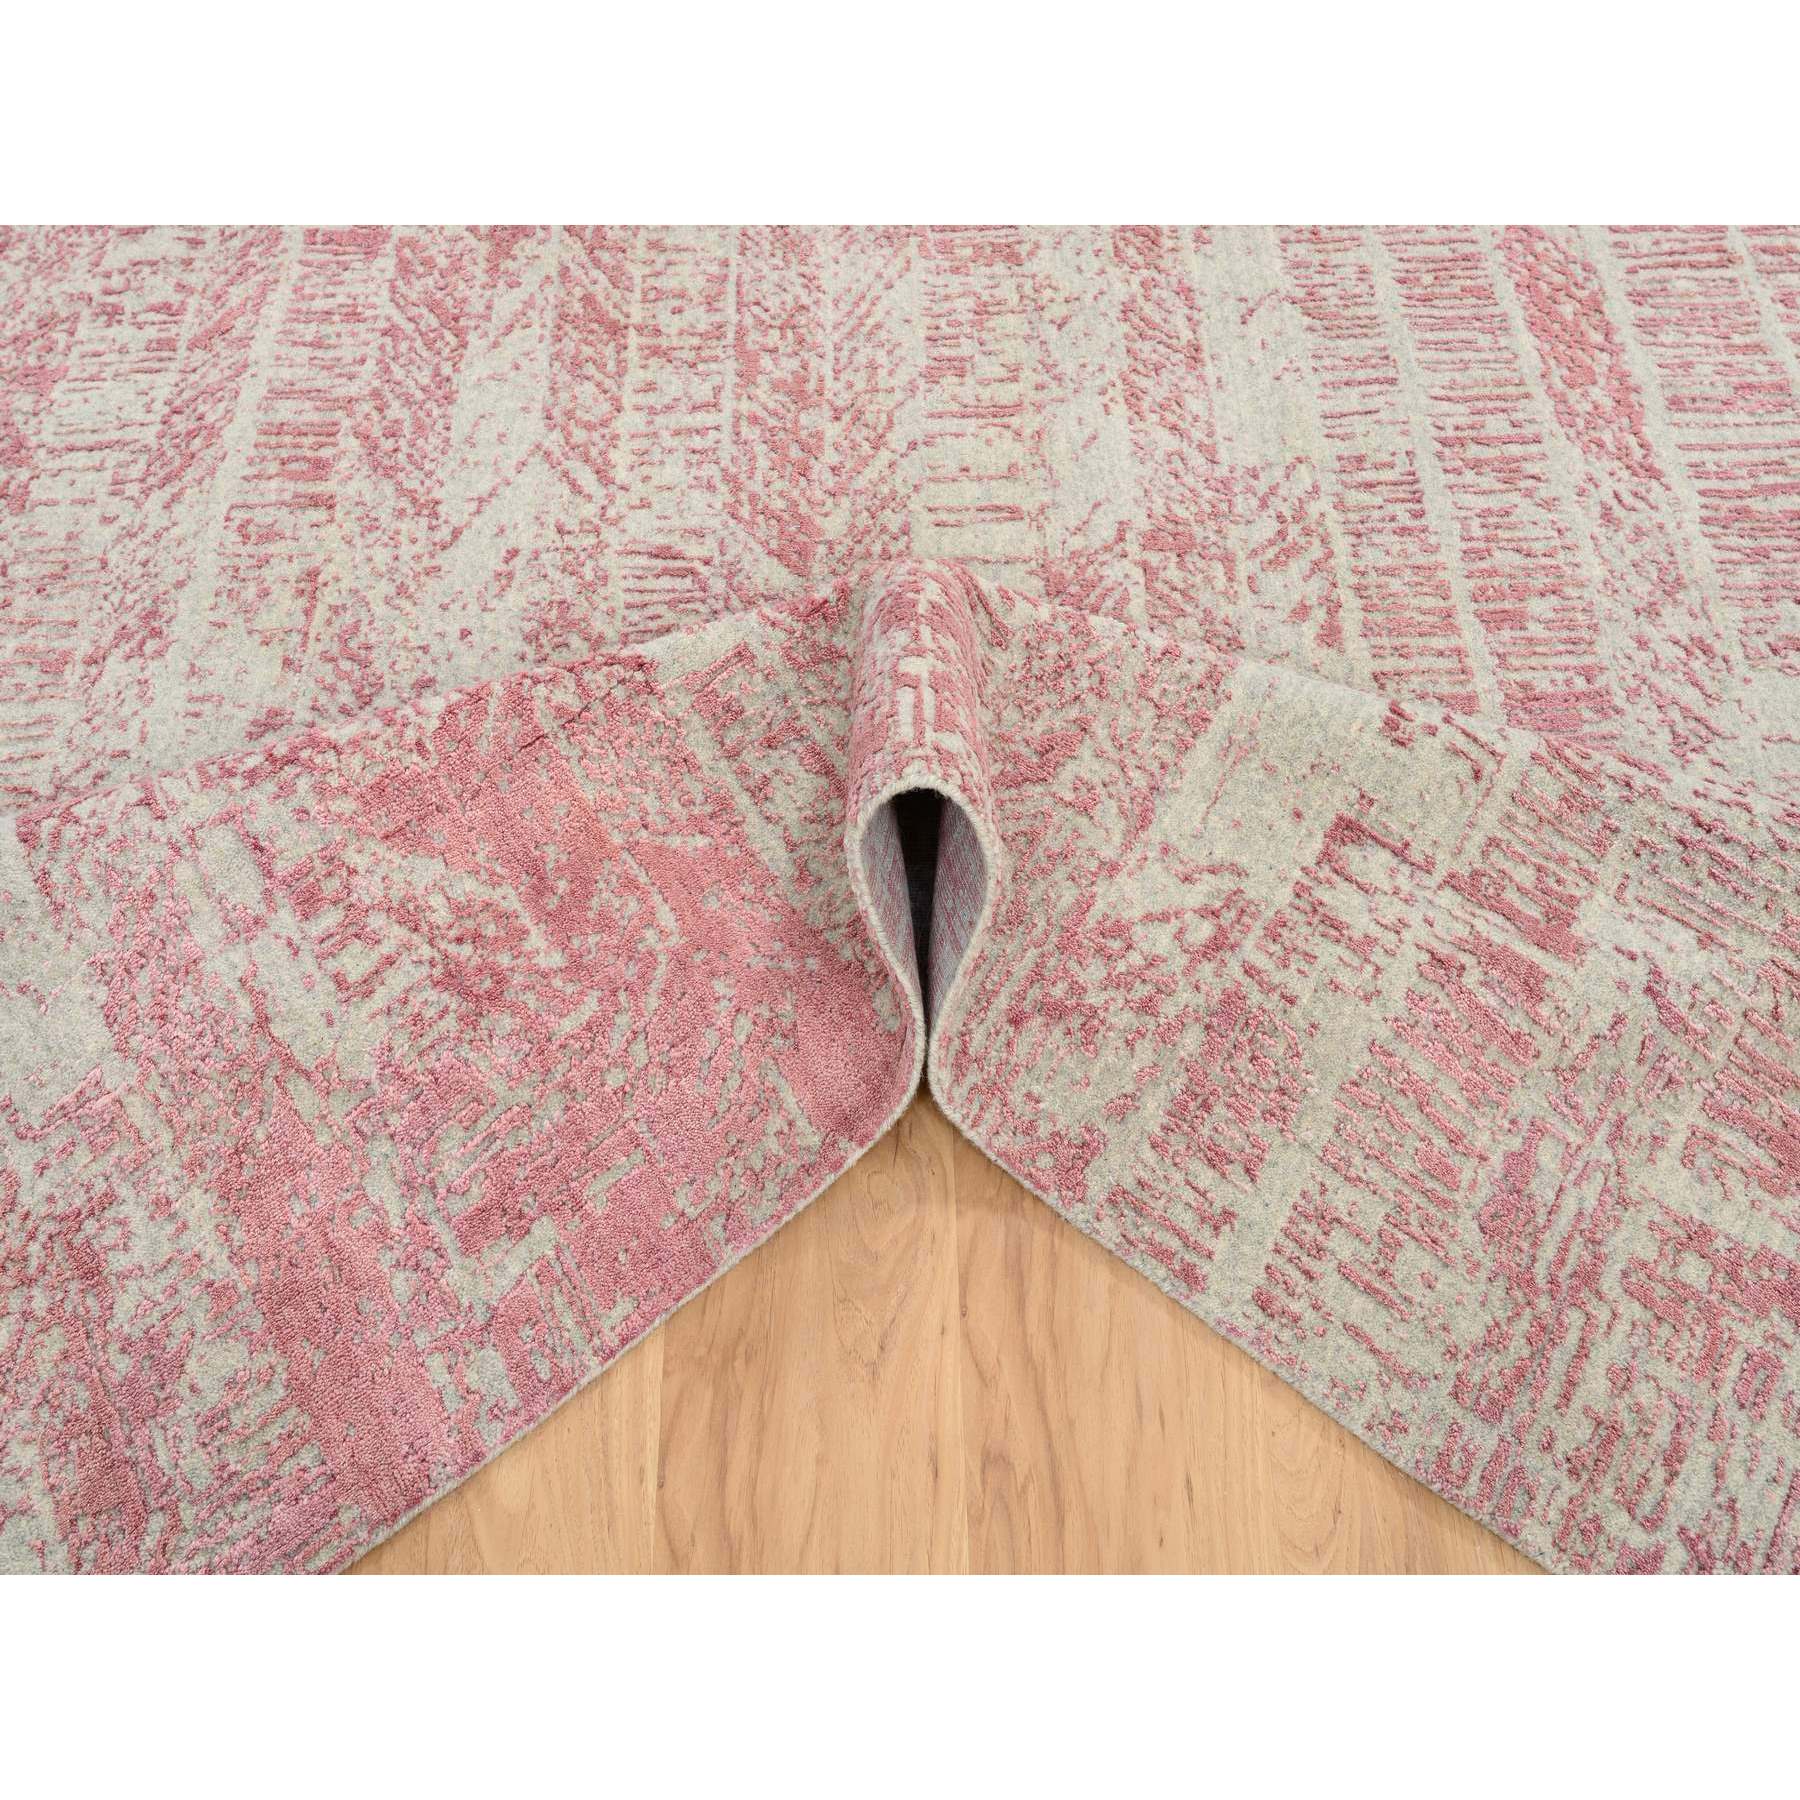 6'x9'1" Rose Pink, Wool and Art Silk Jacquard Hand Loomed, All Over Design, Oriental Rug 